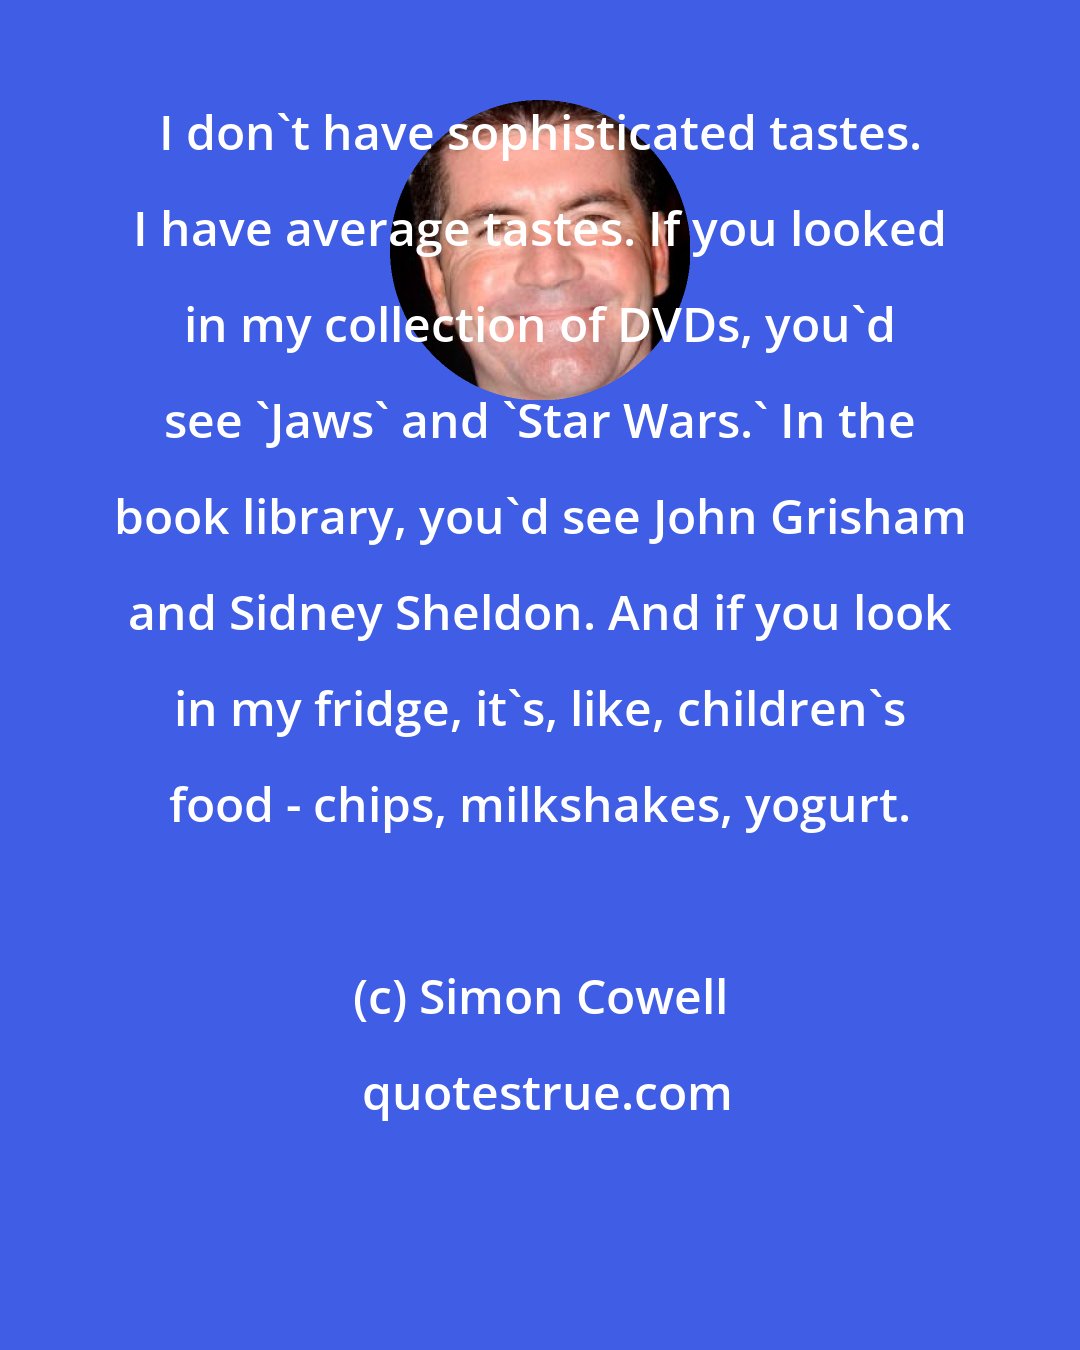 Simon Cowell: I don't have sophisticated tastes. I have average tastes. If you looked in my collection of DVDs, you'd see 'Jaws' and 'Star Wars.' In the book library, you'd see John Grisham and Sidney Sheldon. And if you look in my fridge, it's, like, children's food - chips, milkshakes, yogurt.